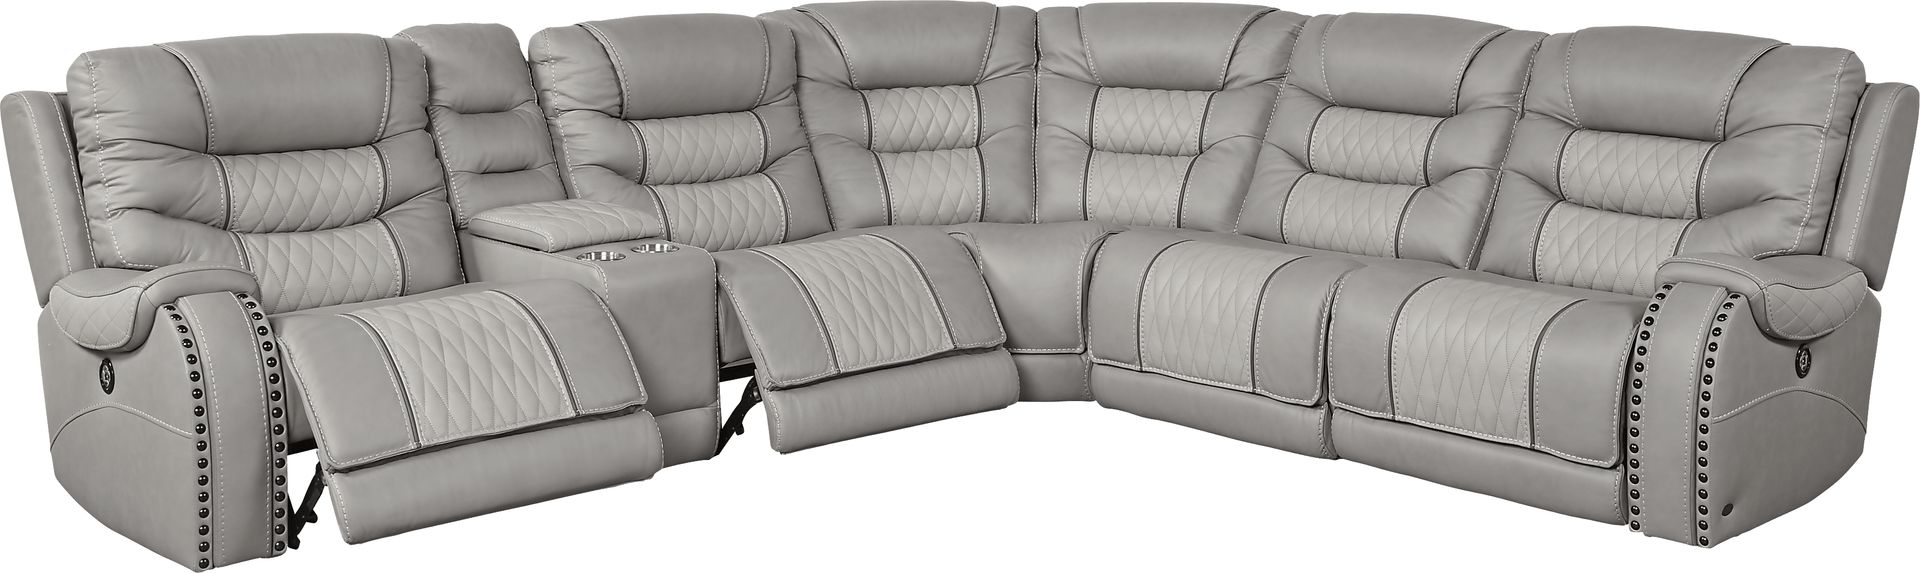 Eric Church Highway To Home Headliner Gray Leather 6 Pc Dual Power Reclining Sectional 1688936P Alt Image 1?cache Id=4a8a7f340546be2553f3f764a124bbf1&w=1920&q=80